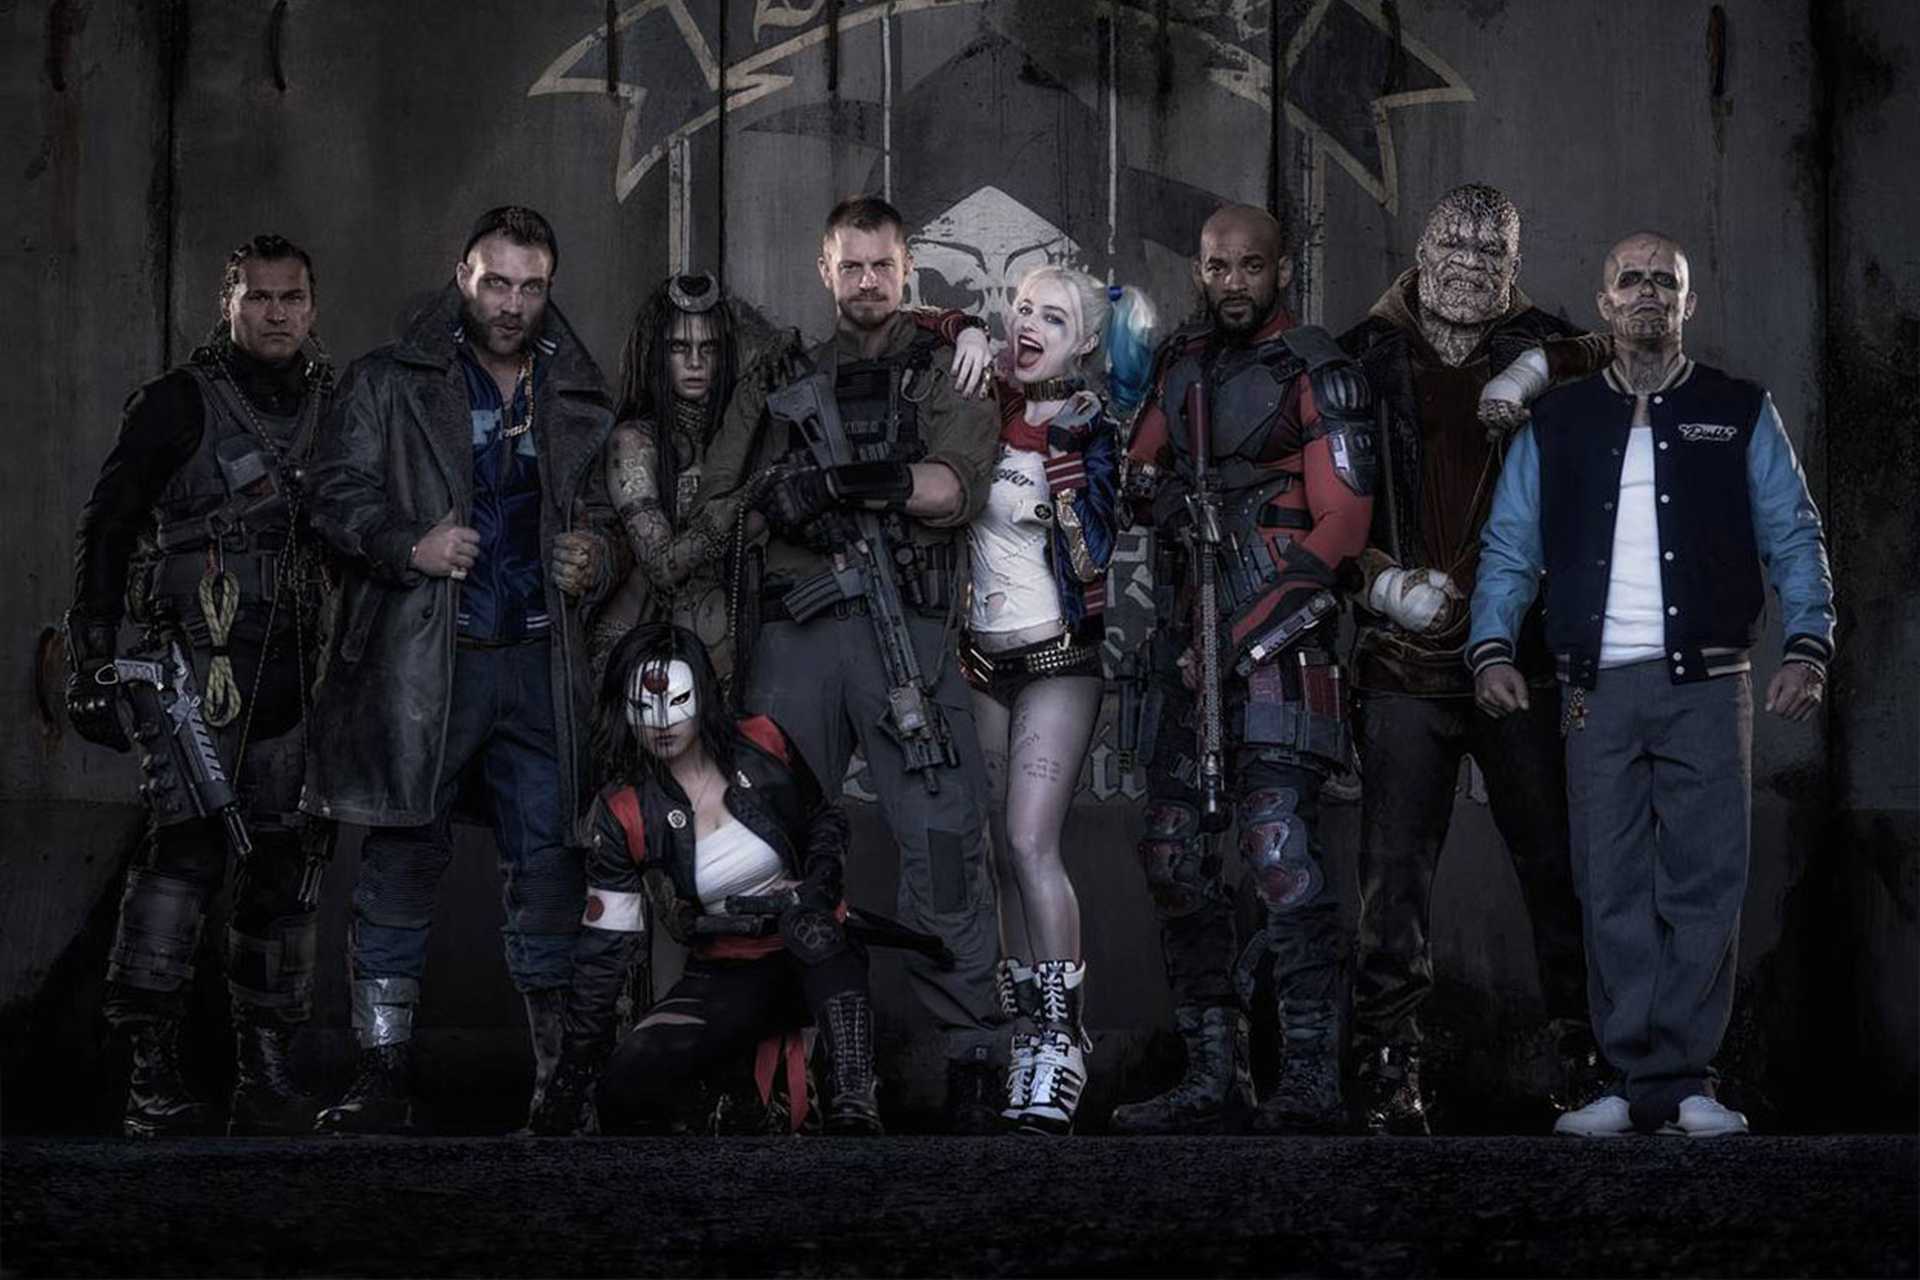 Shooting For Suicide Squad 2 Delayed To 2019 | Moviedash.com